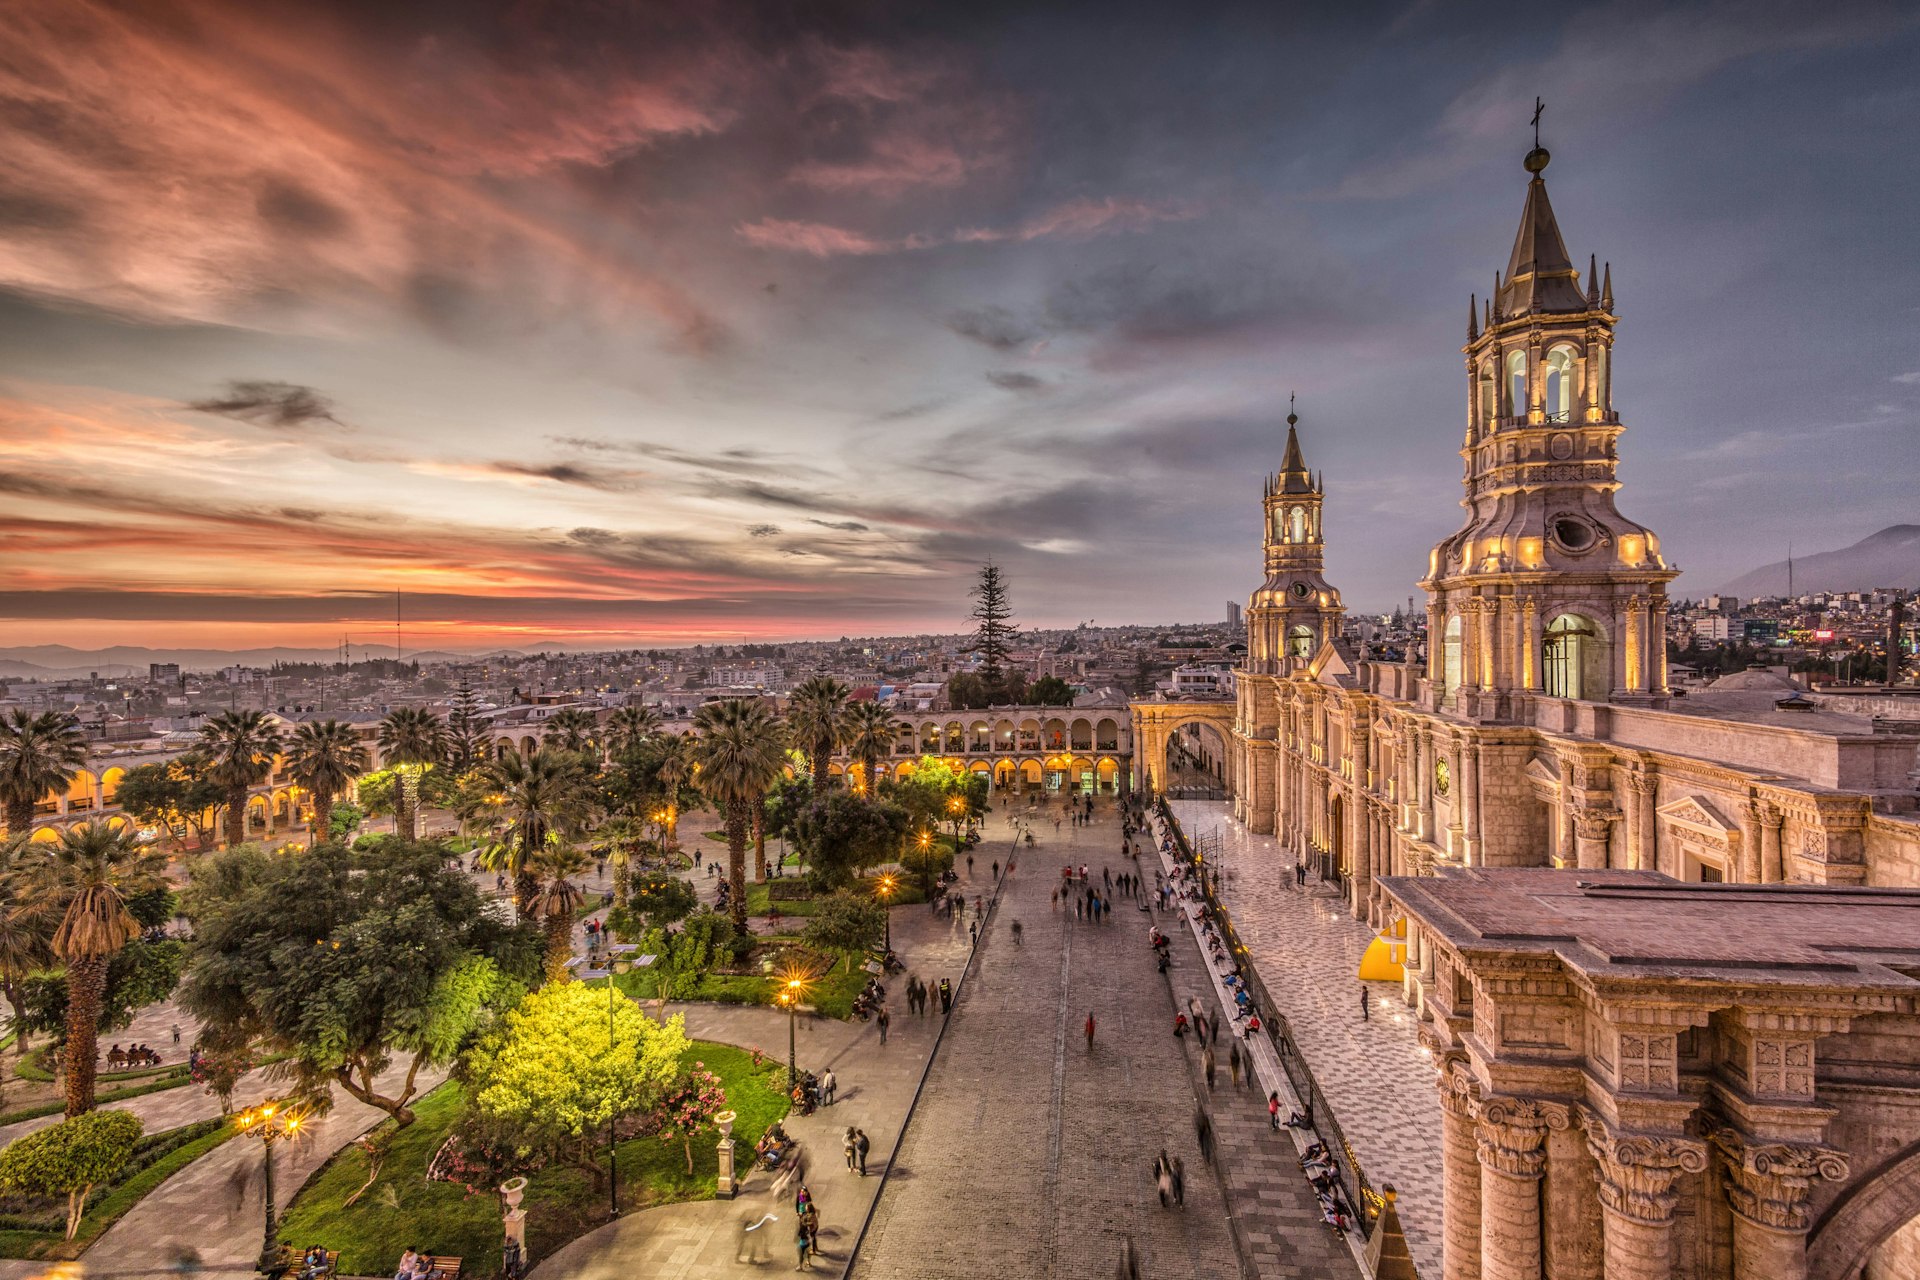 Sunset over the Plaza de Armas in Arequipa, Peru